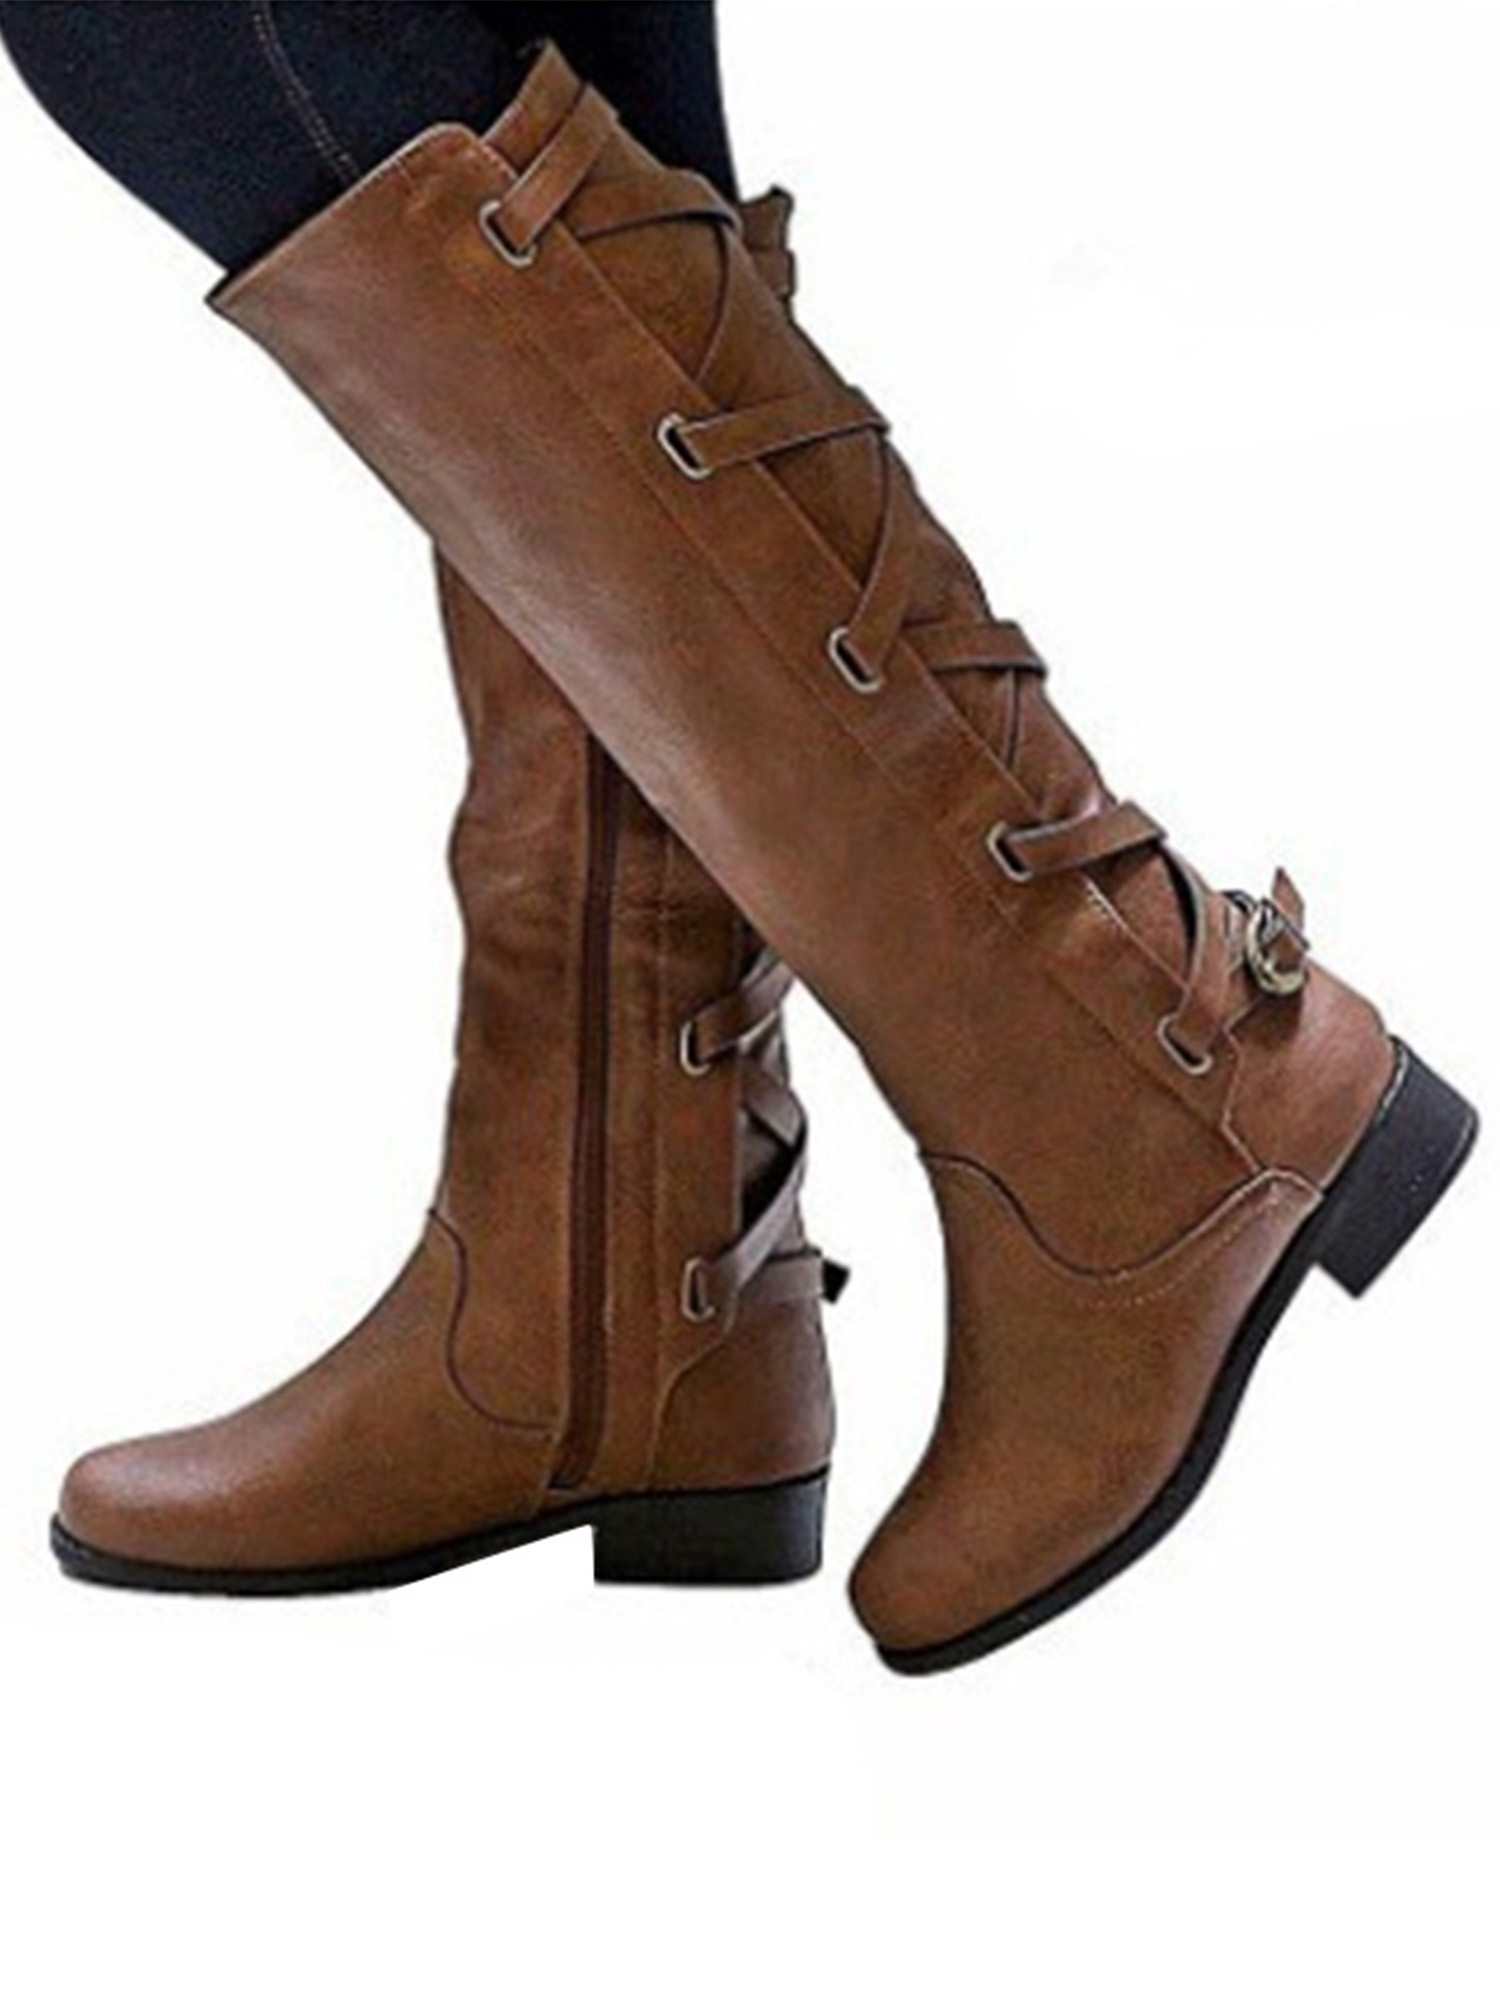 Details about  / New Womens Genuine Leather Knee High Fashion Boots Square Toe Riding Shoes Boots